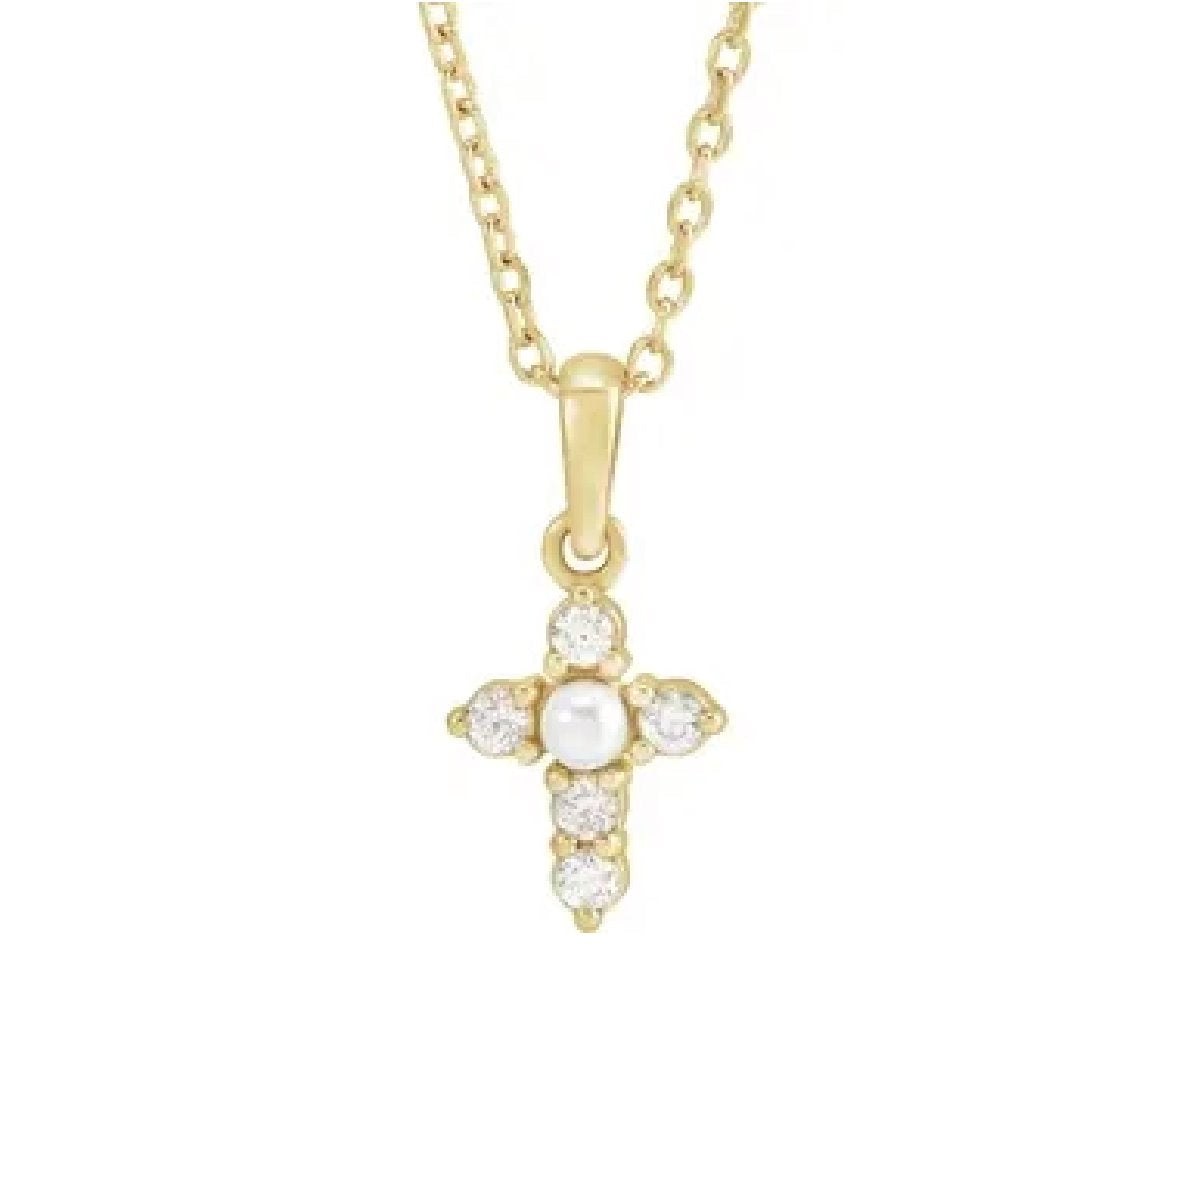 Diamond and Pearl Cross Necklace Necklace Robyn Canady 14K Solid Gold 